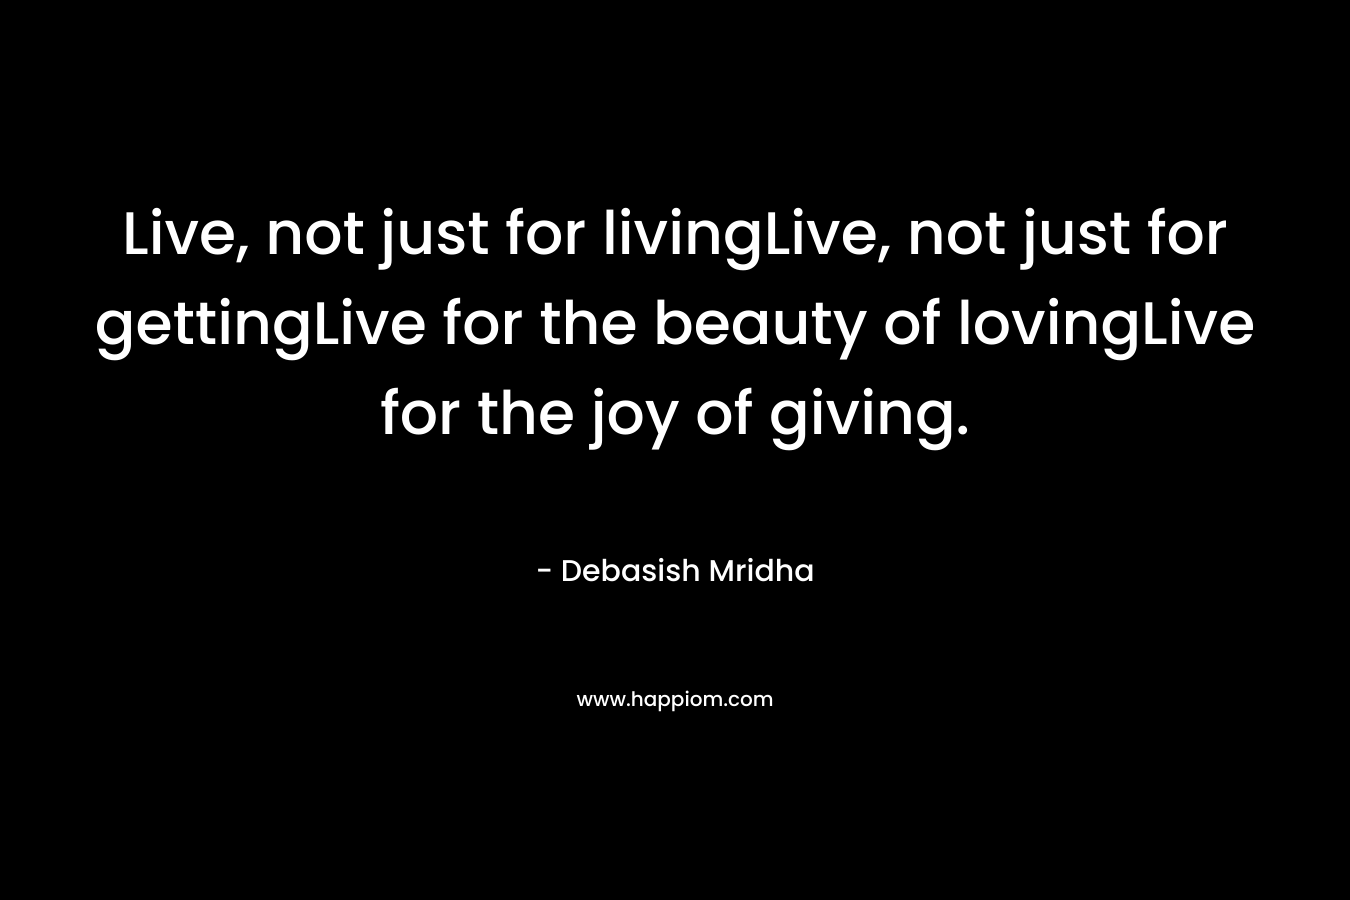 Live, not just for livingLive, not just for gettingLive for the beauty of lovingLive for the joy of giving.